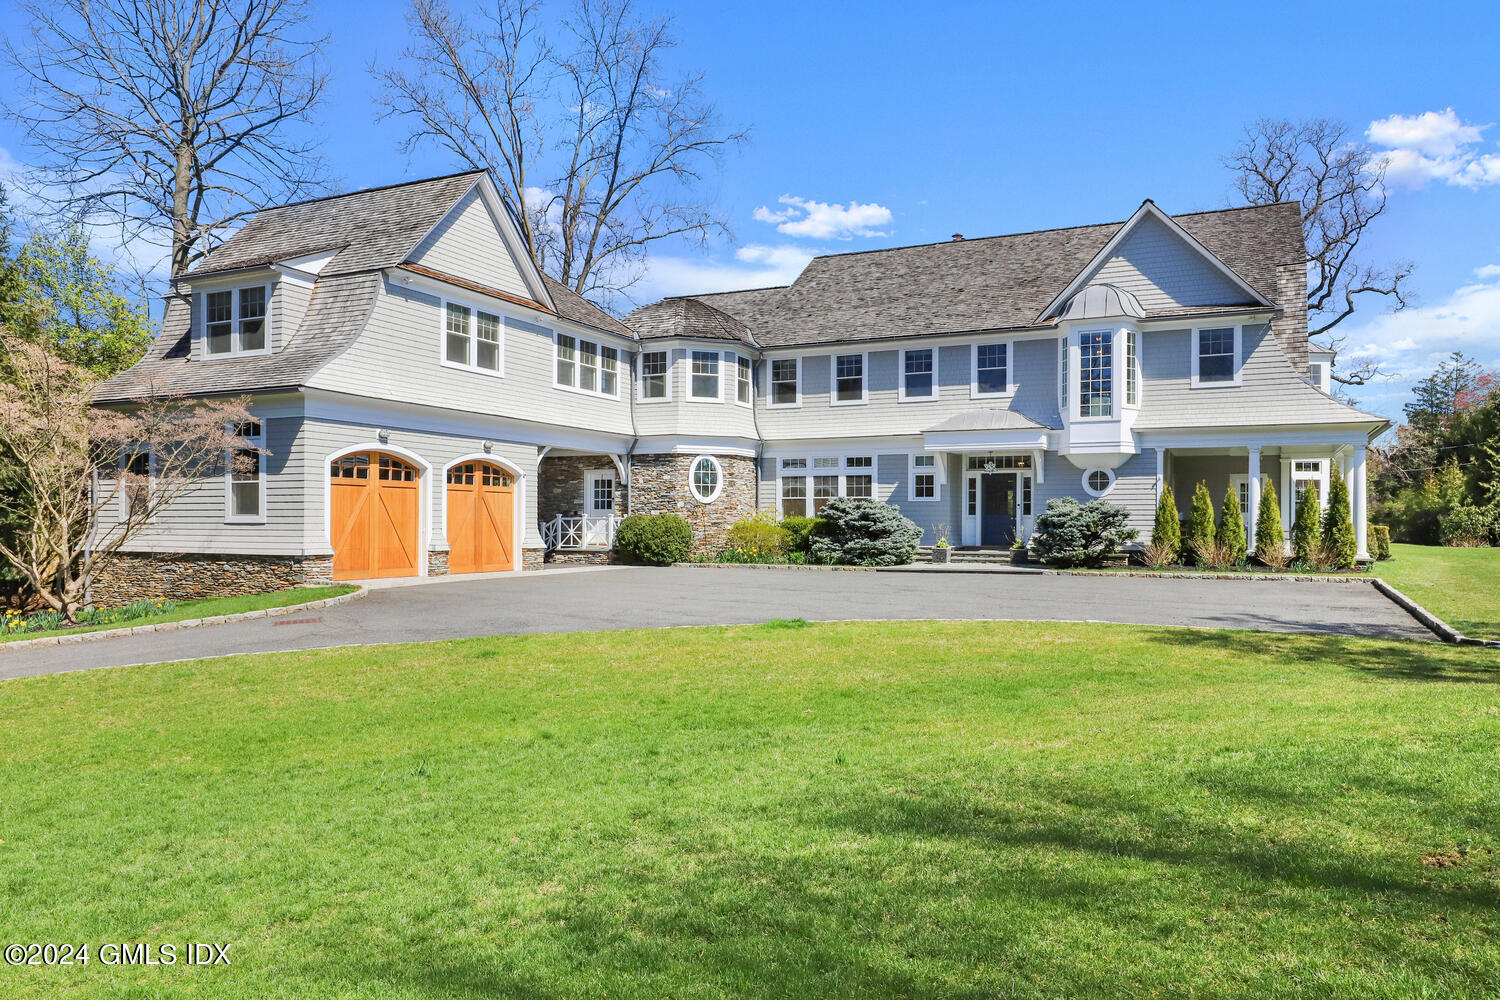 80 Meadow Wood Drive, Greenwich, Connecticut - 6 Bedrooms  
7.5 Bathrooms - 